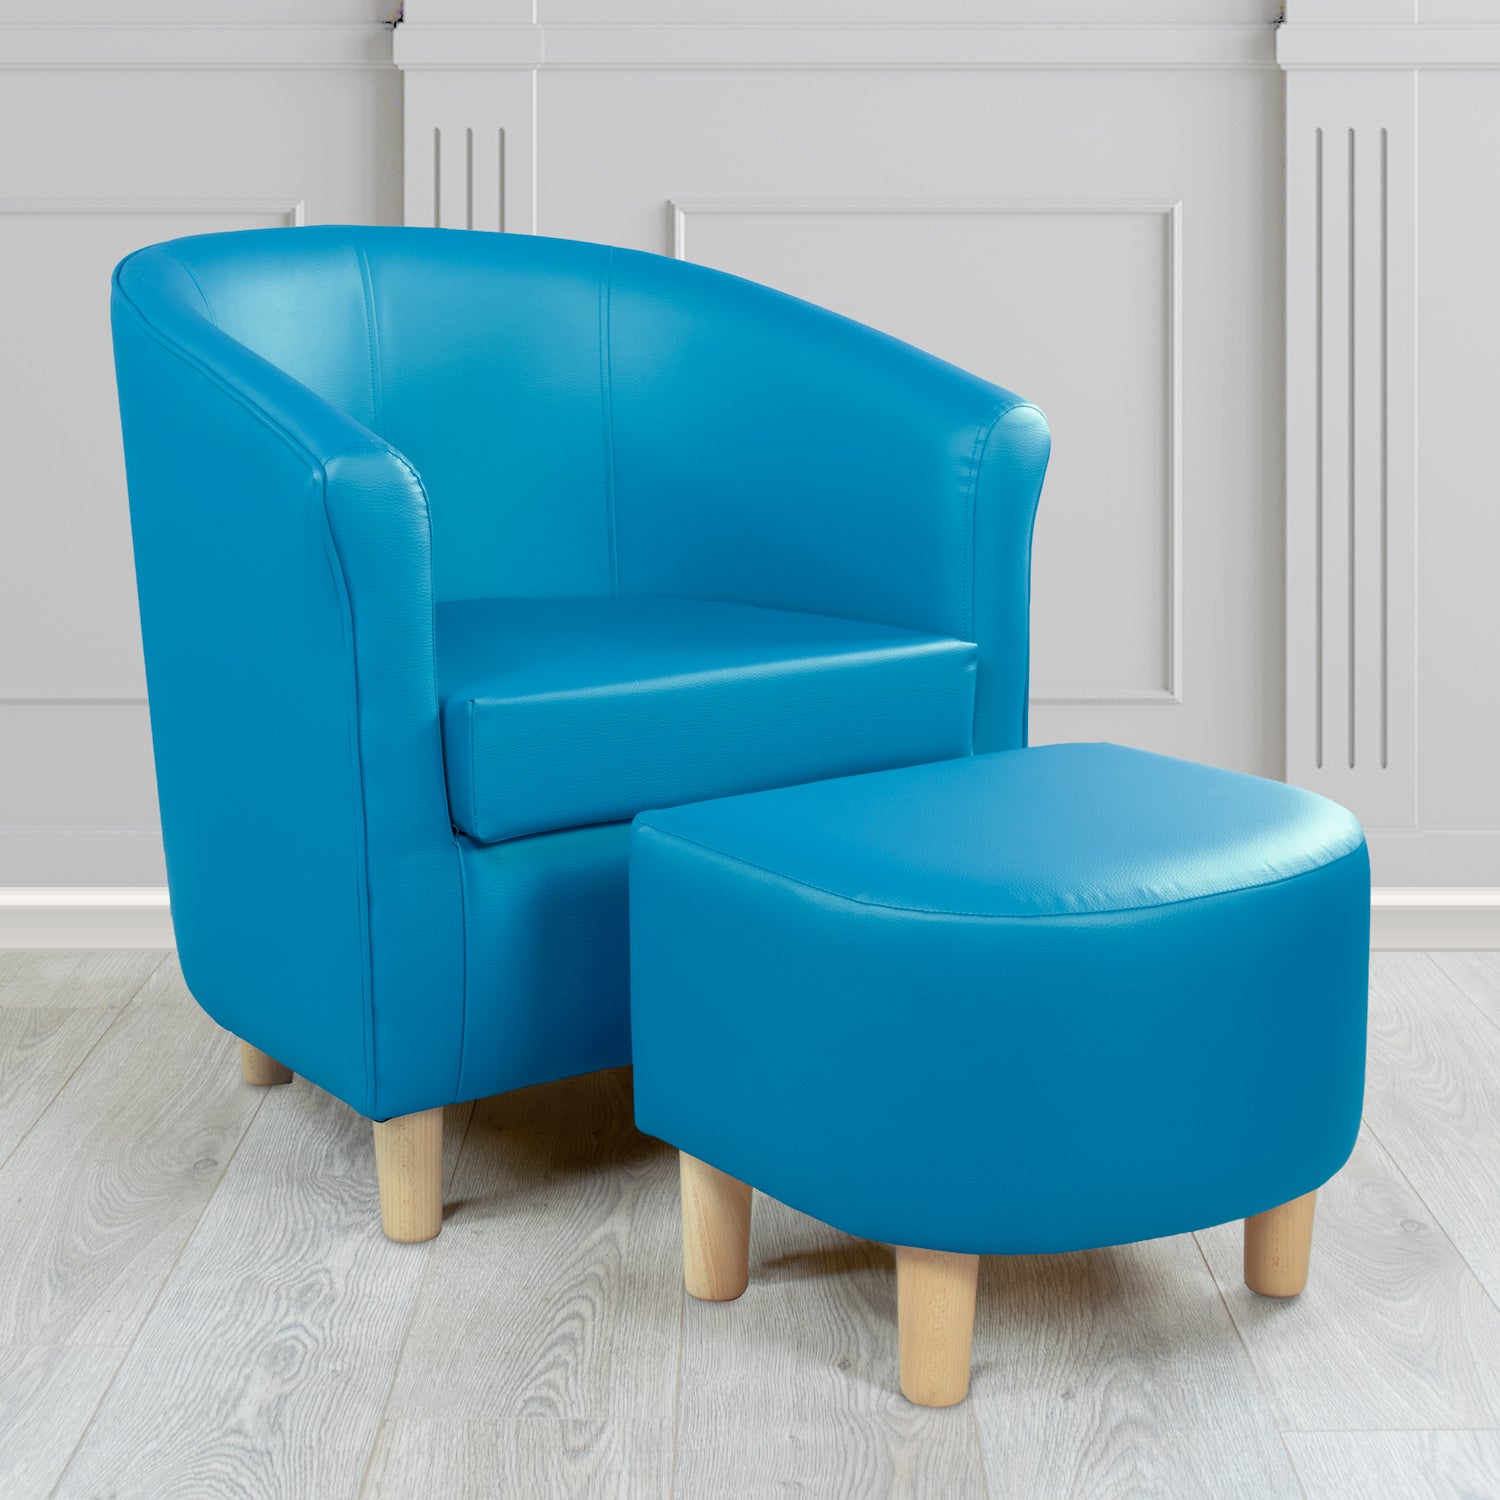 Express Tuscany Electric Blue DN Faux Leather Tub Chair with Footstool Set (6541298073642)